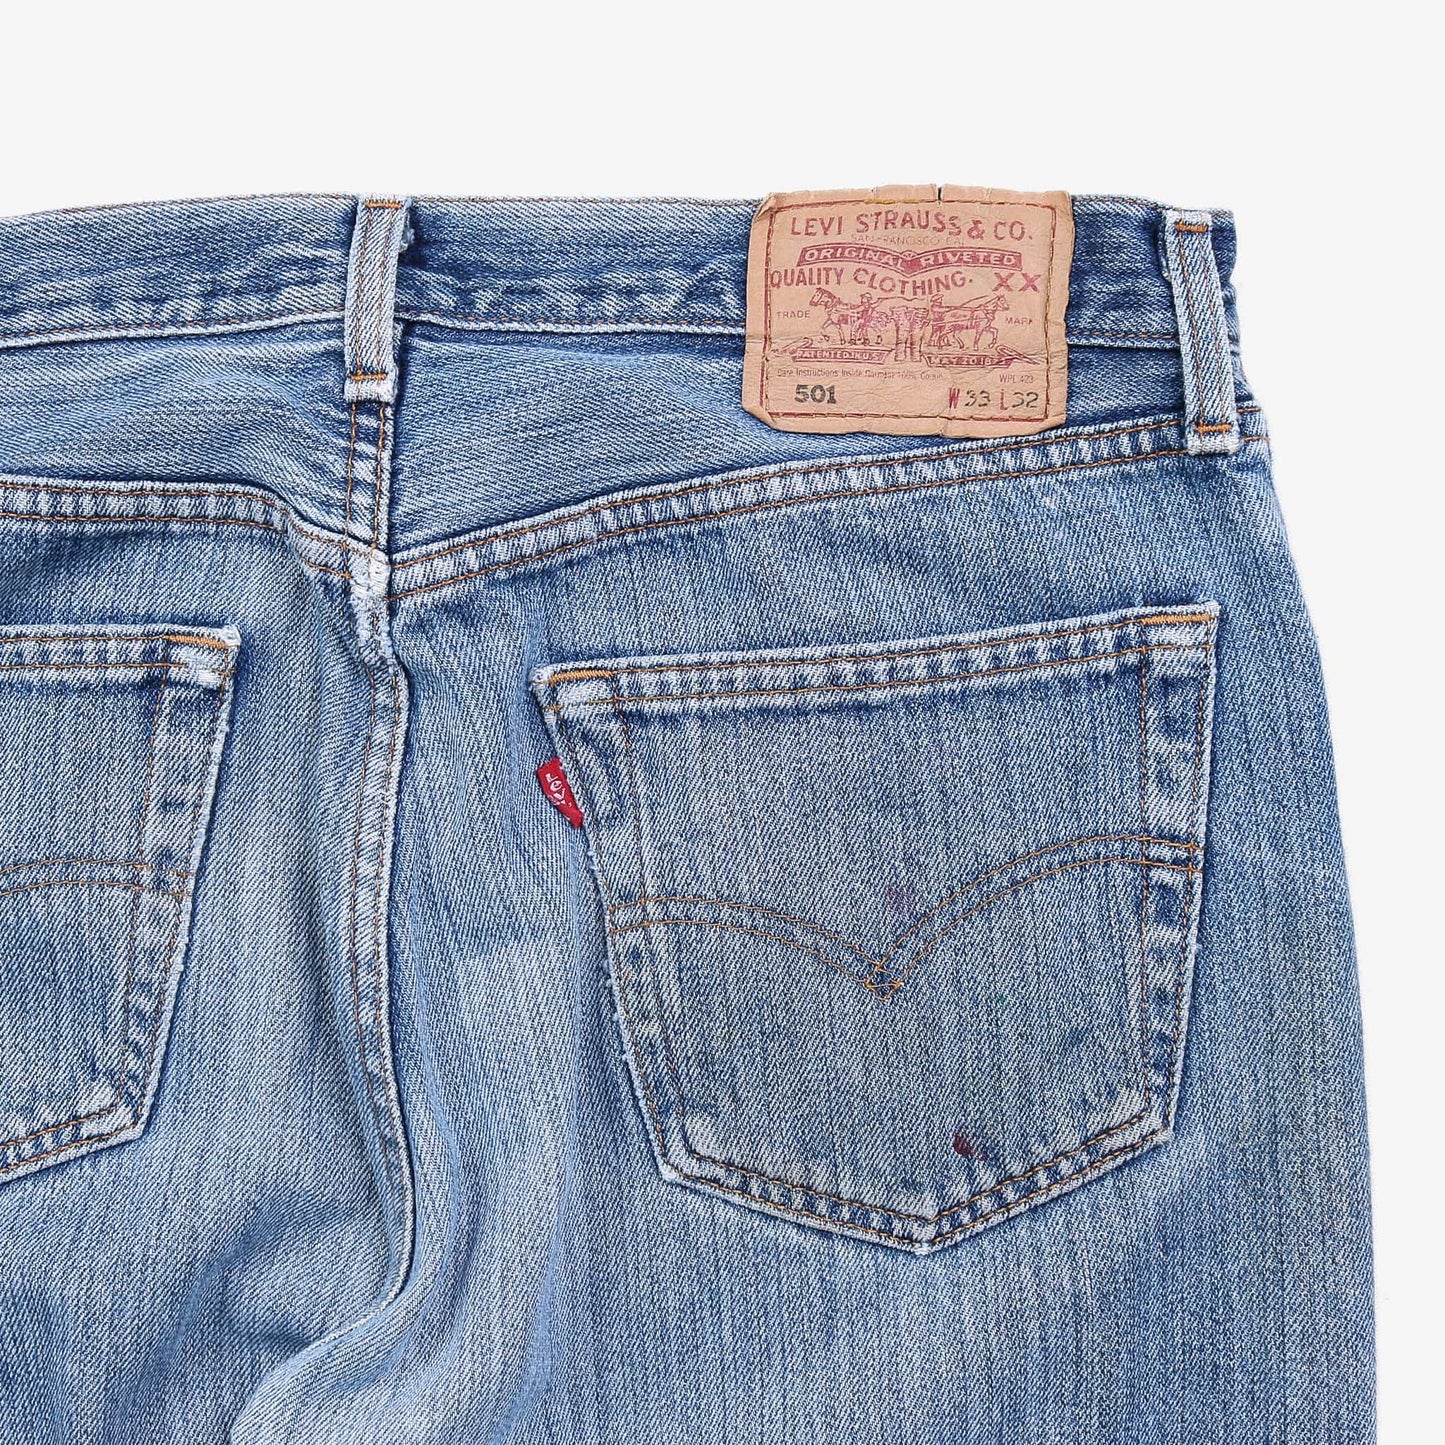 Vintage 501 Jeans - 33" 32" - American Madness